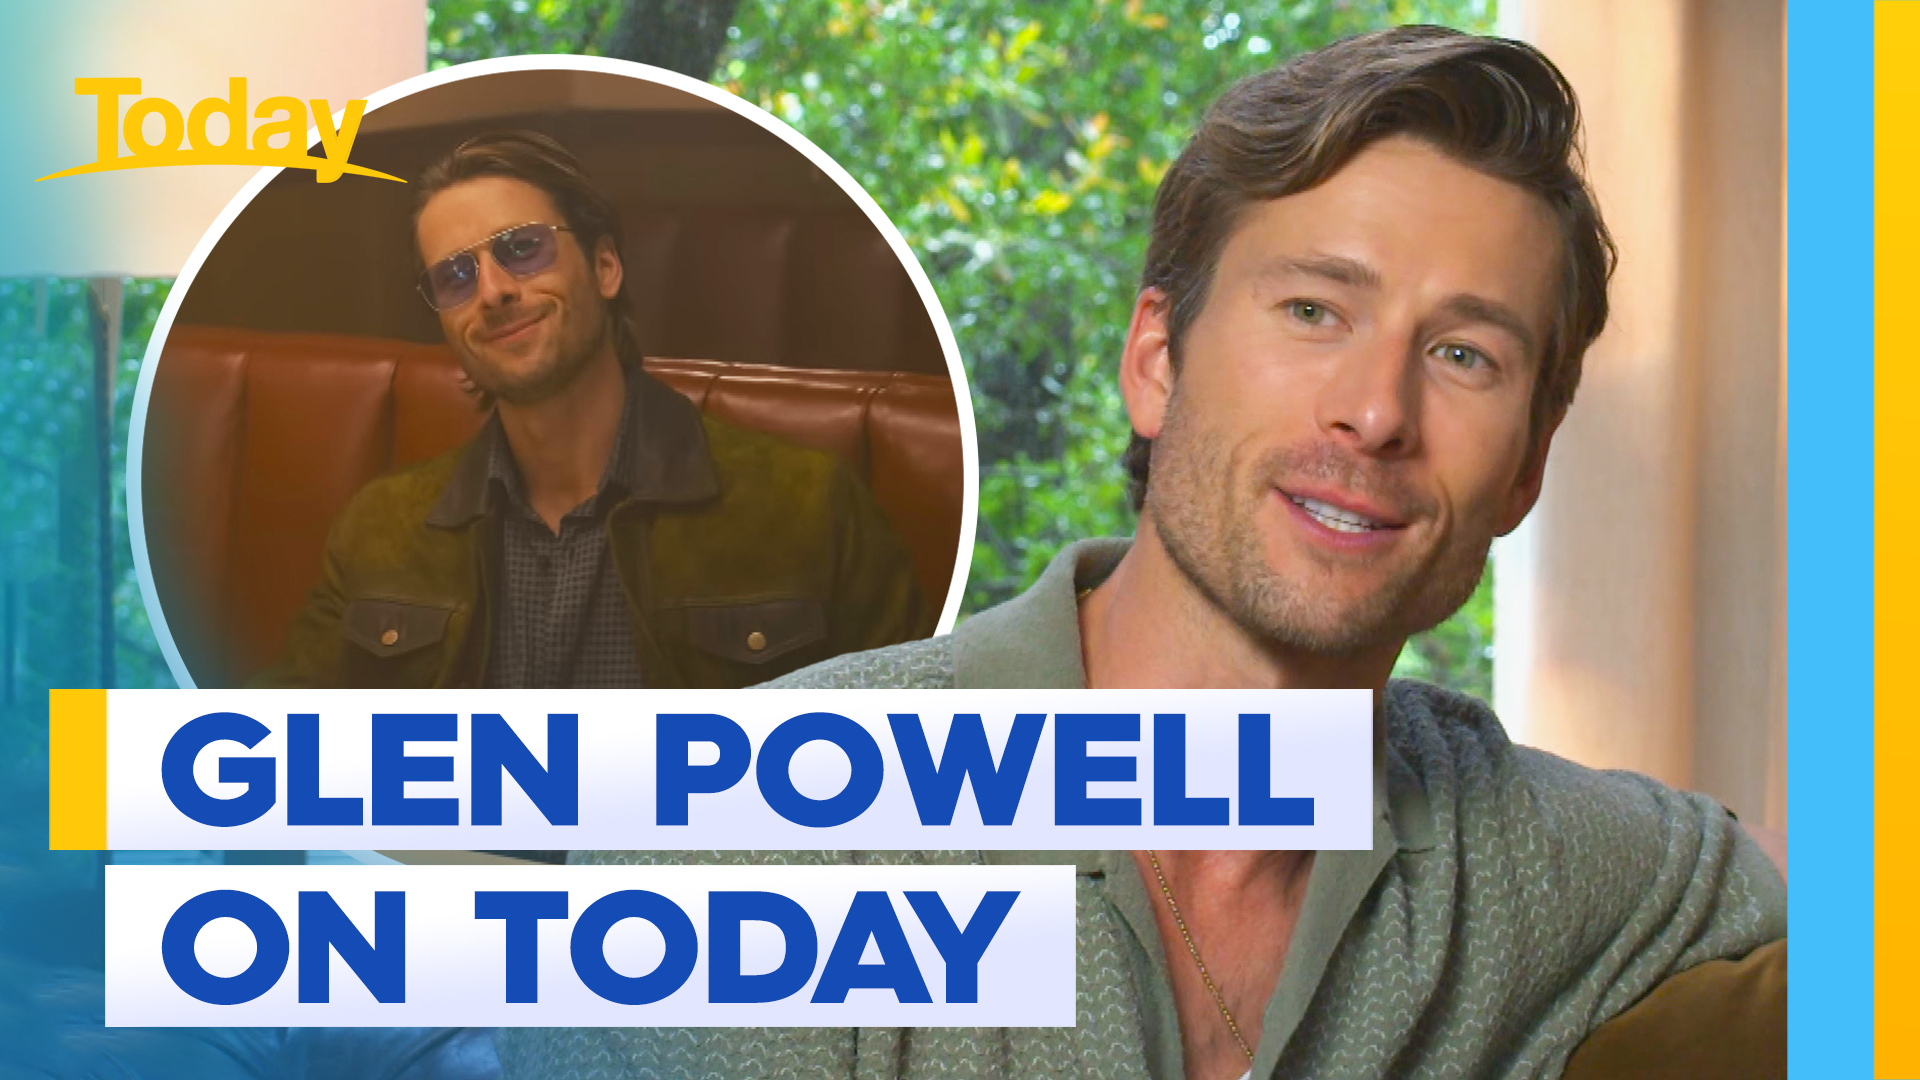 Glen Powell catches up with Today